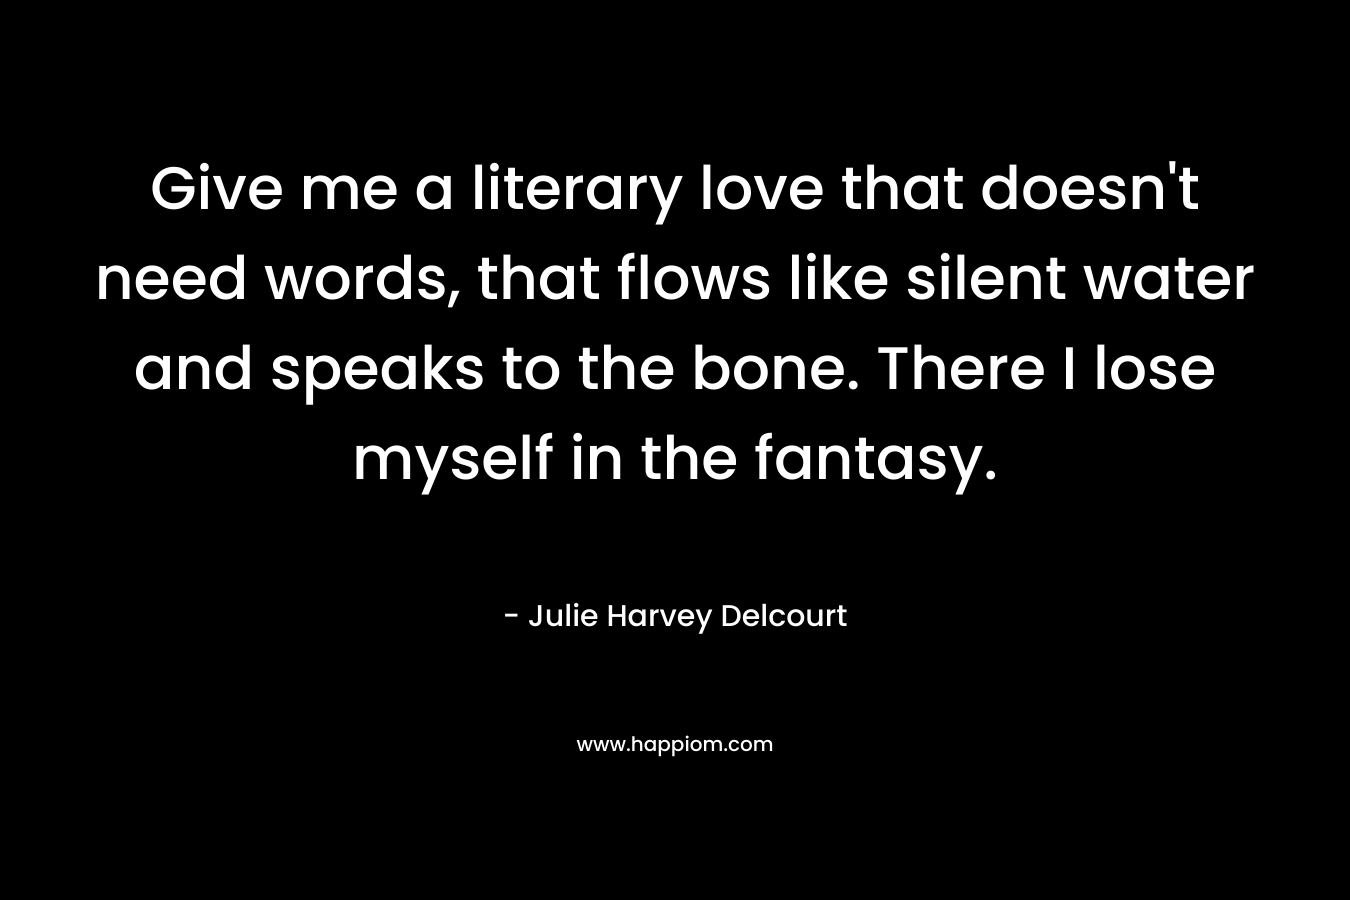 Give me a literary love that doesn’t need words, that flows like silent water and speaks to the bone. There I lose myself in the fantasy. – Julie Harvey Delcourt